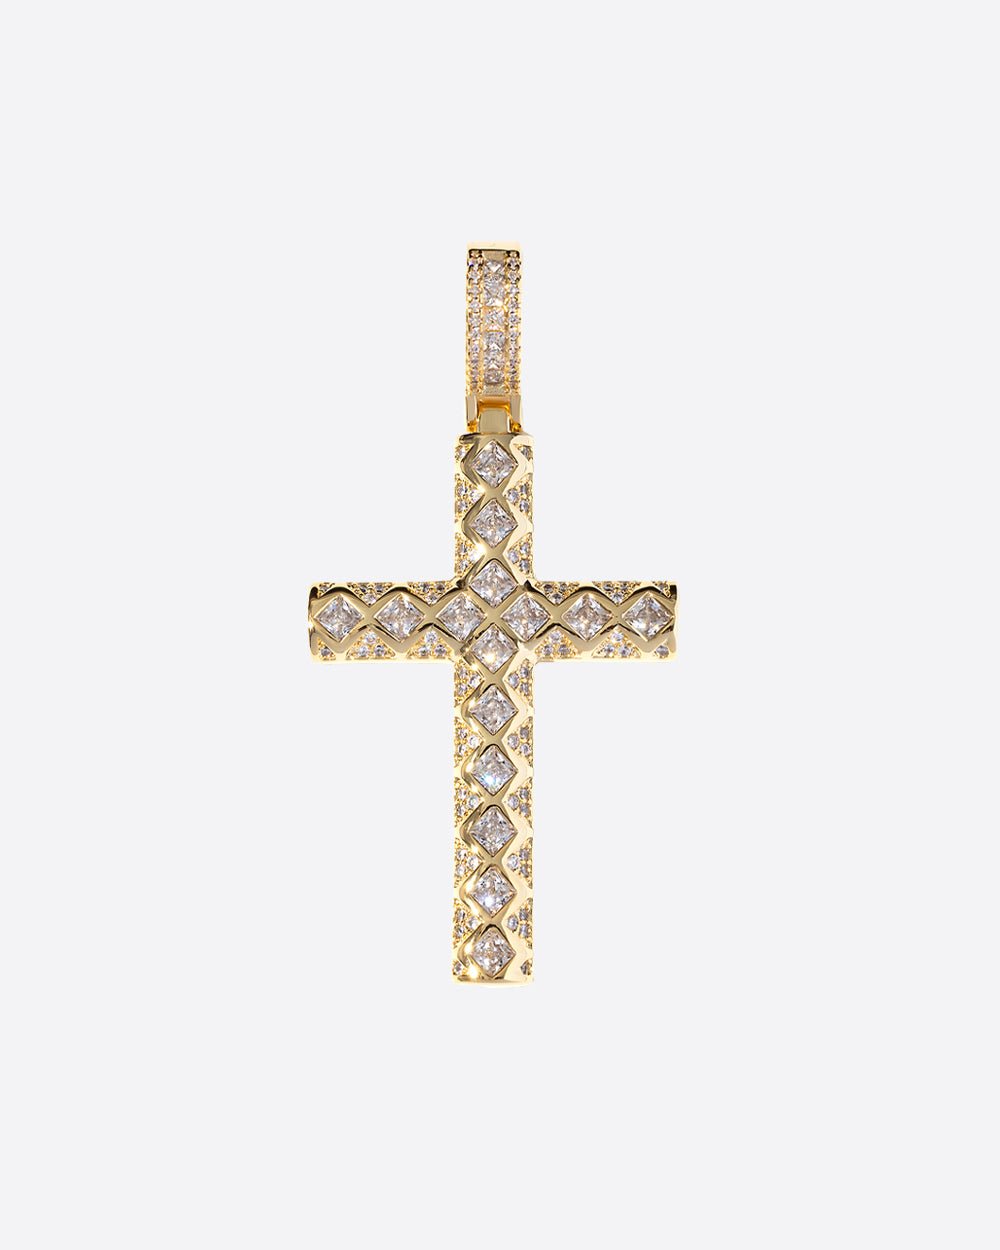 FROSTED CROSS PENDANT. - 14K GOLD - Drippy Amsterdam